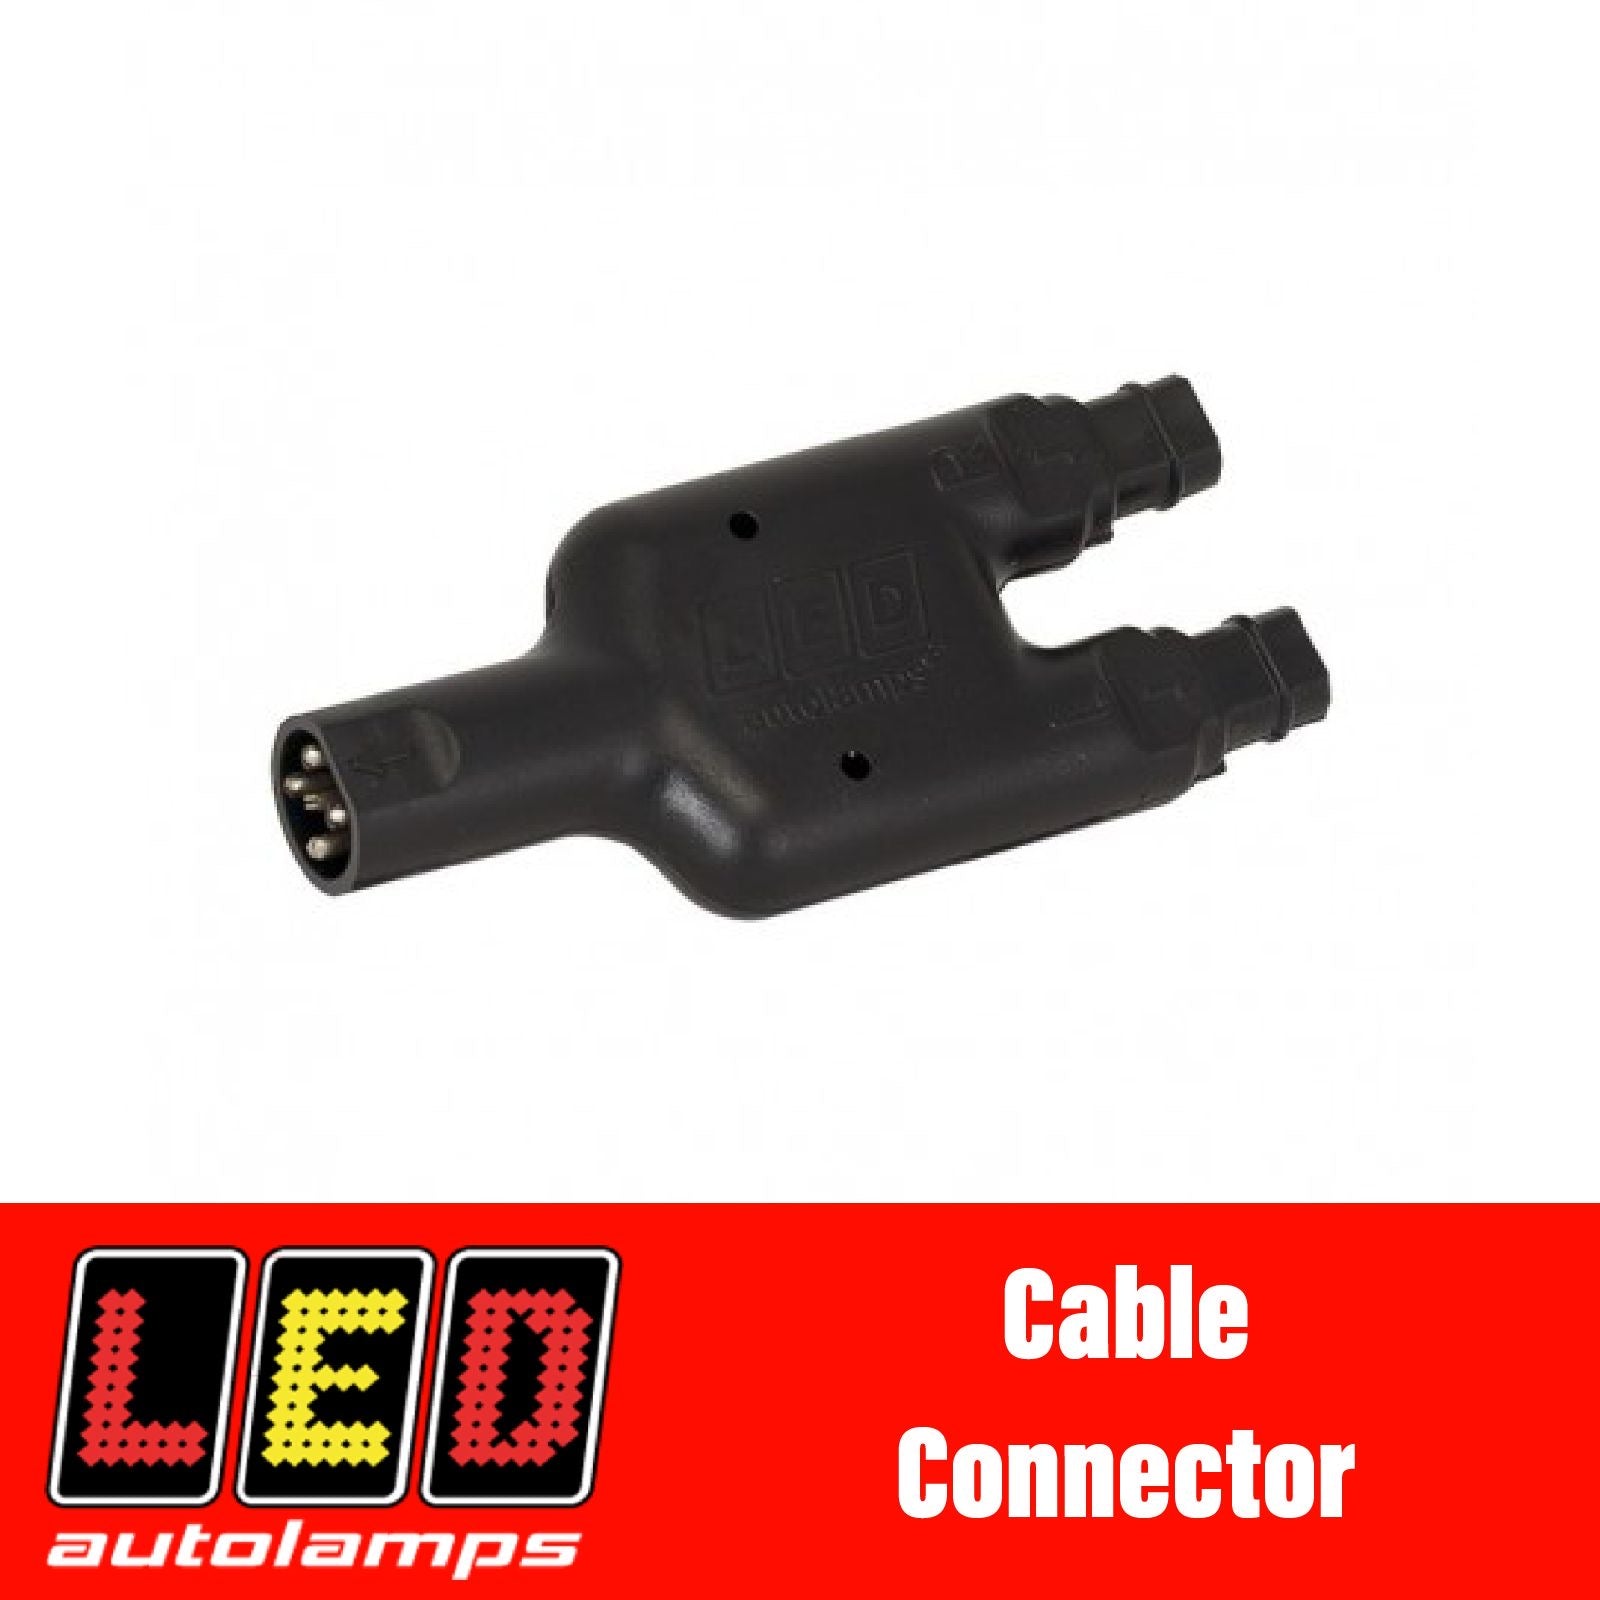 LED AUTOLAMPS BCC1 5 Wire to 4 Wire Connector